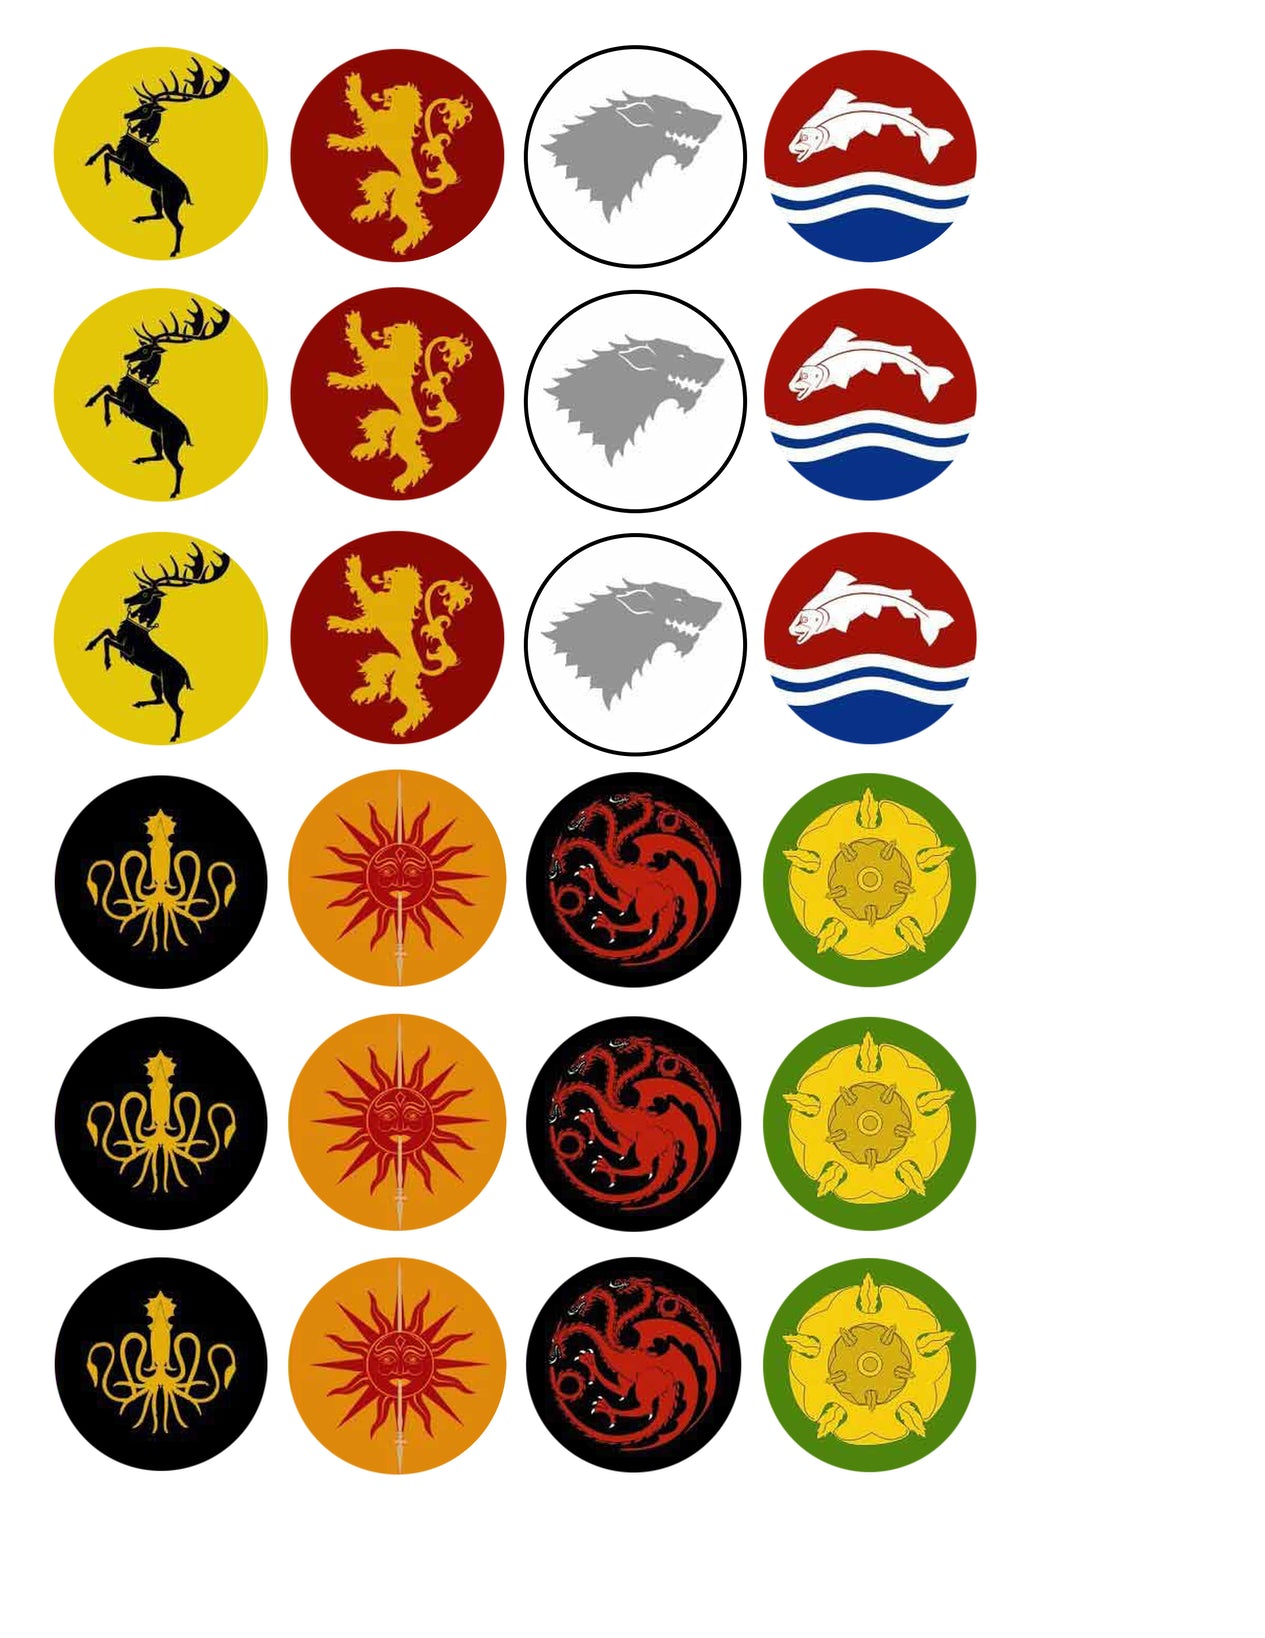 Game of Thrones House Emblems the Dire Wolf House Stark the Lion House Lannister the Dragon House Targaryen Edible Cupcake Topper Images ABPID14787